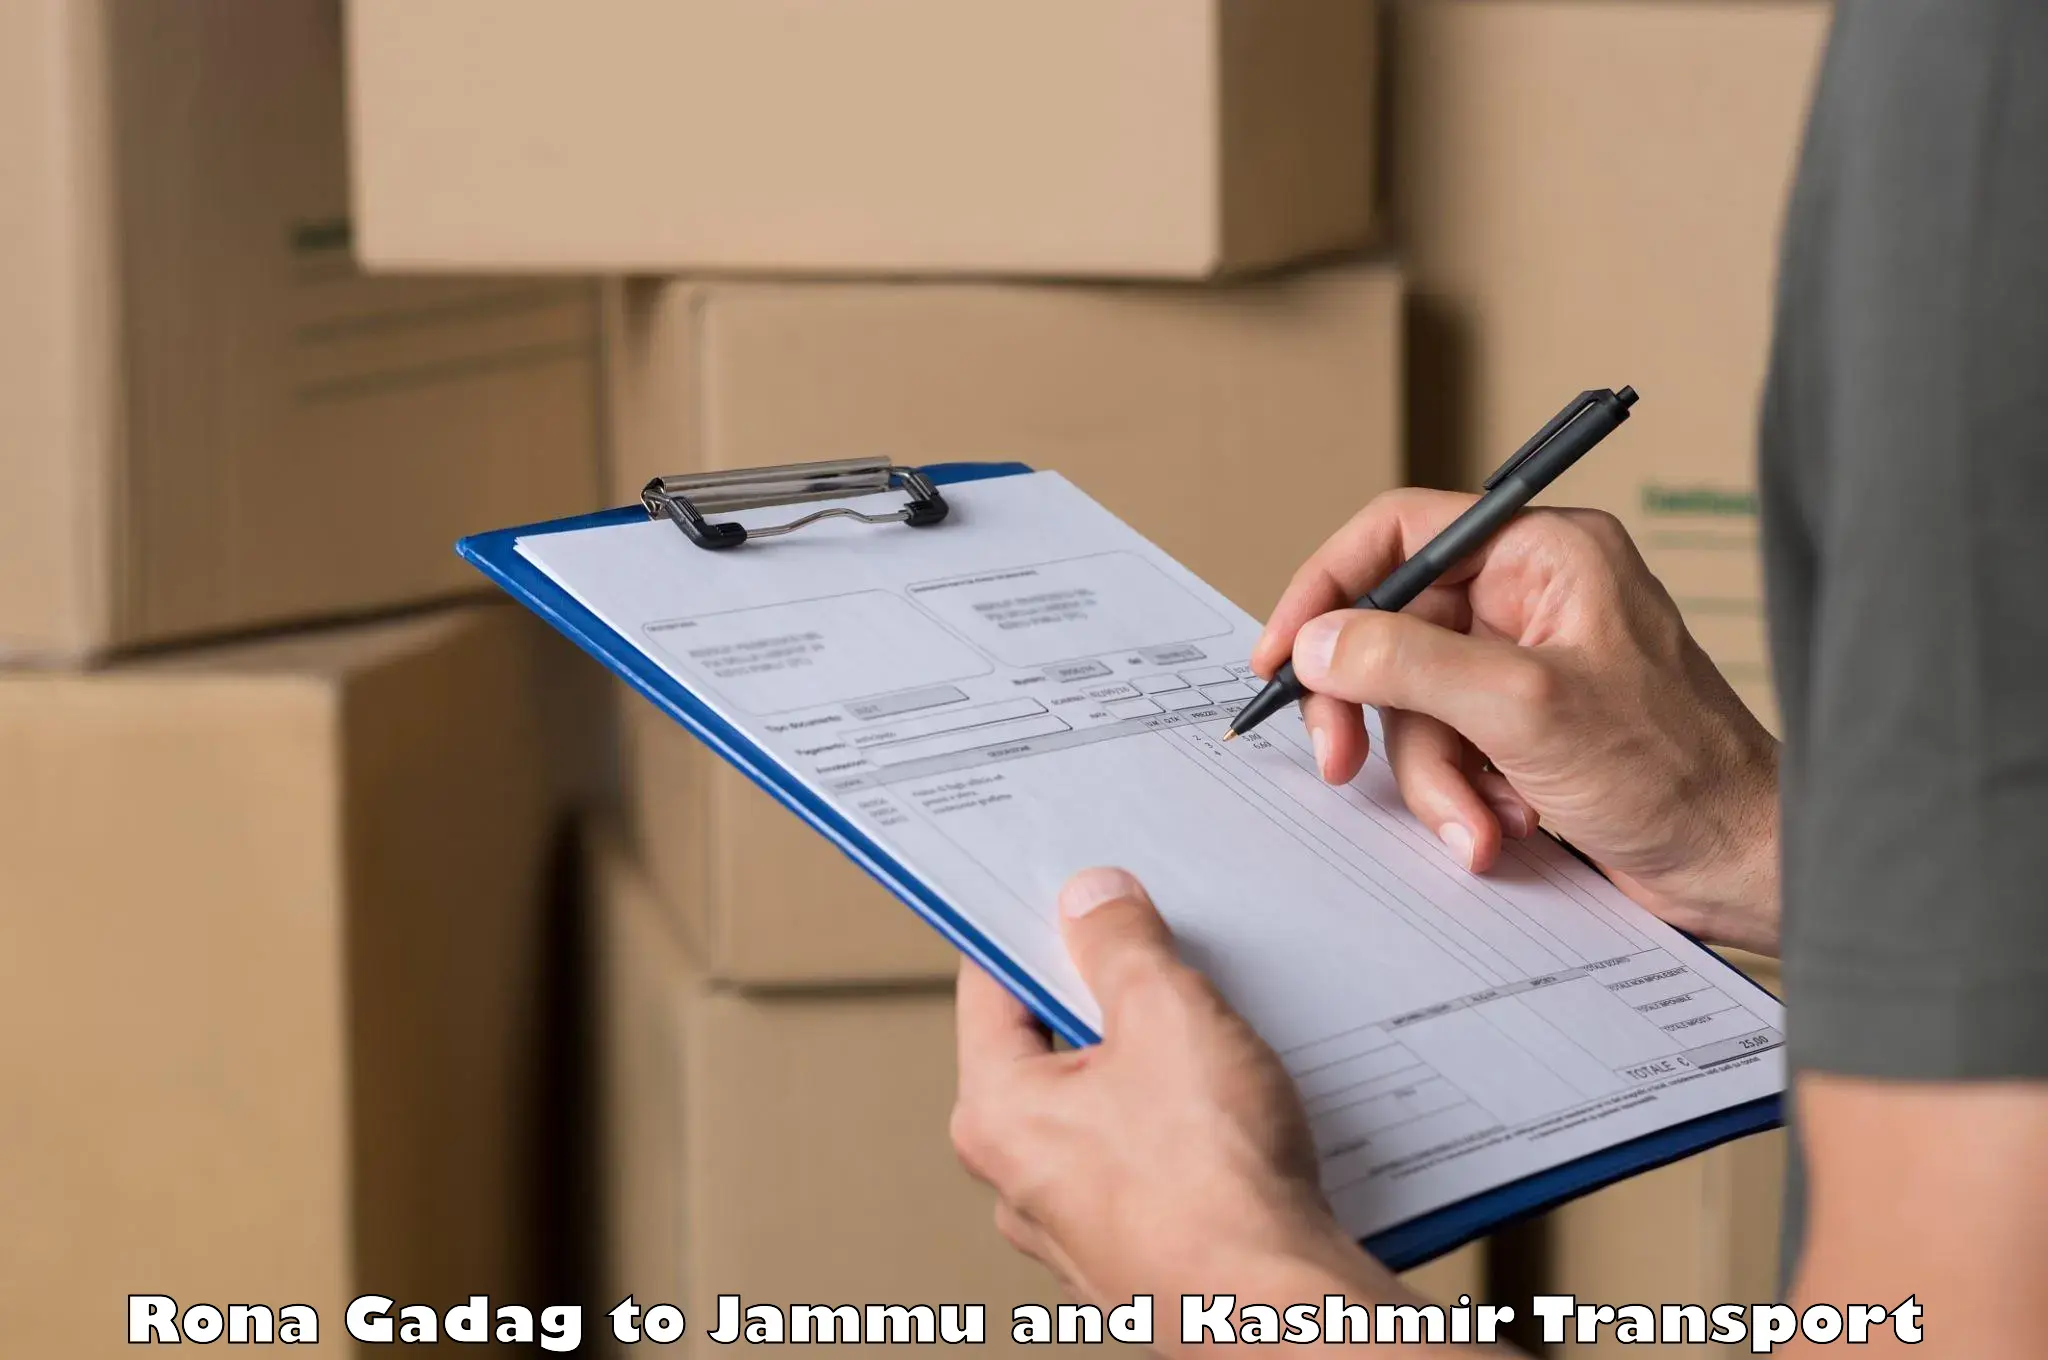 Goods delivery service Rona Gadag to Baramulla